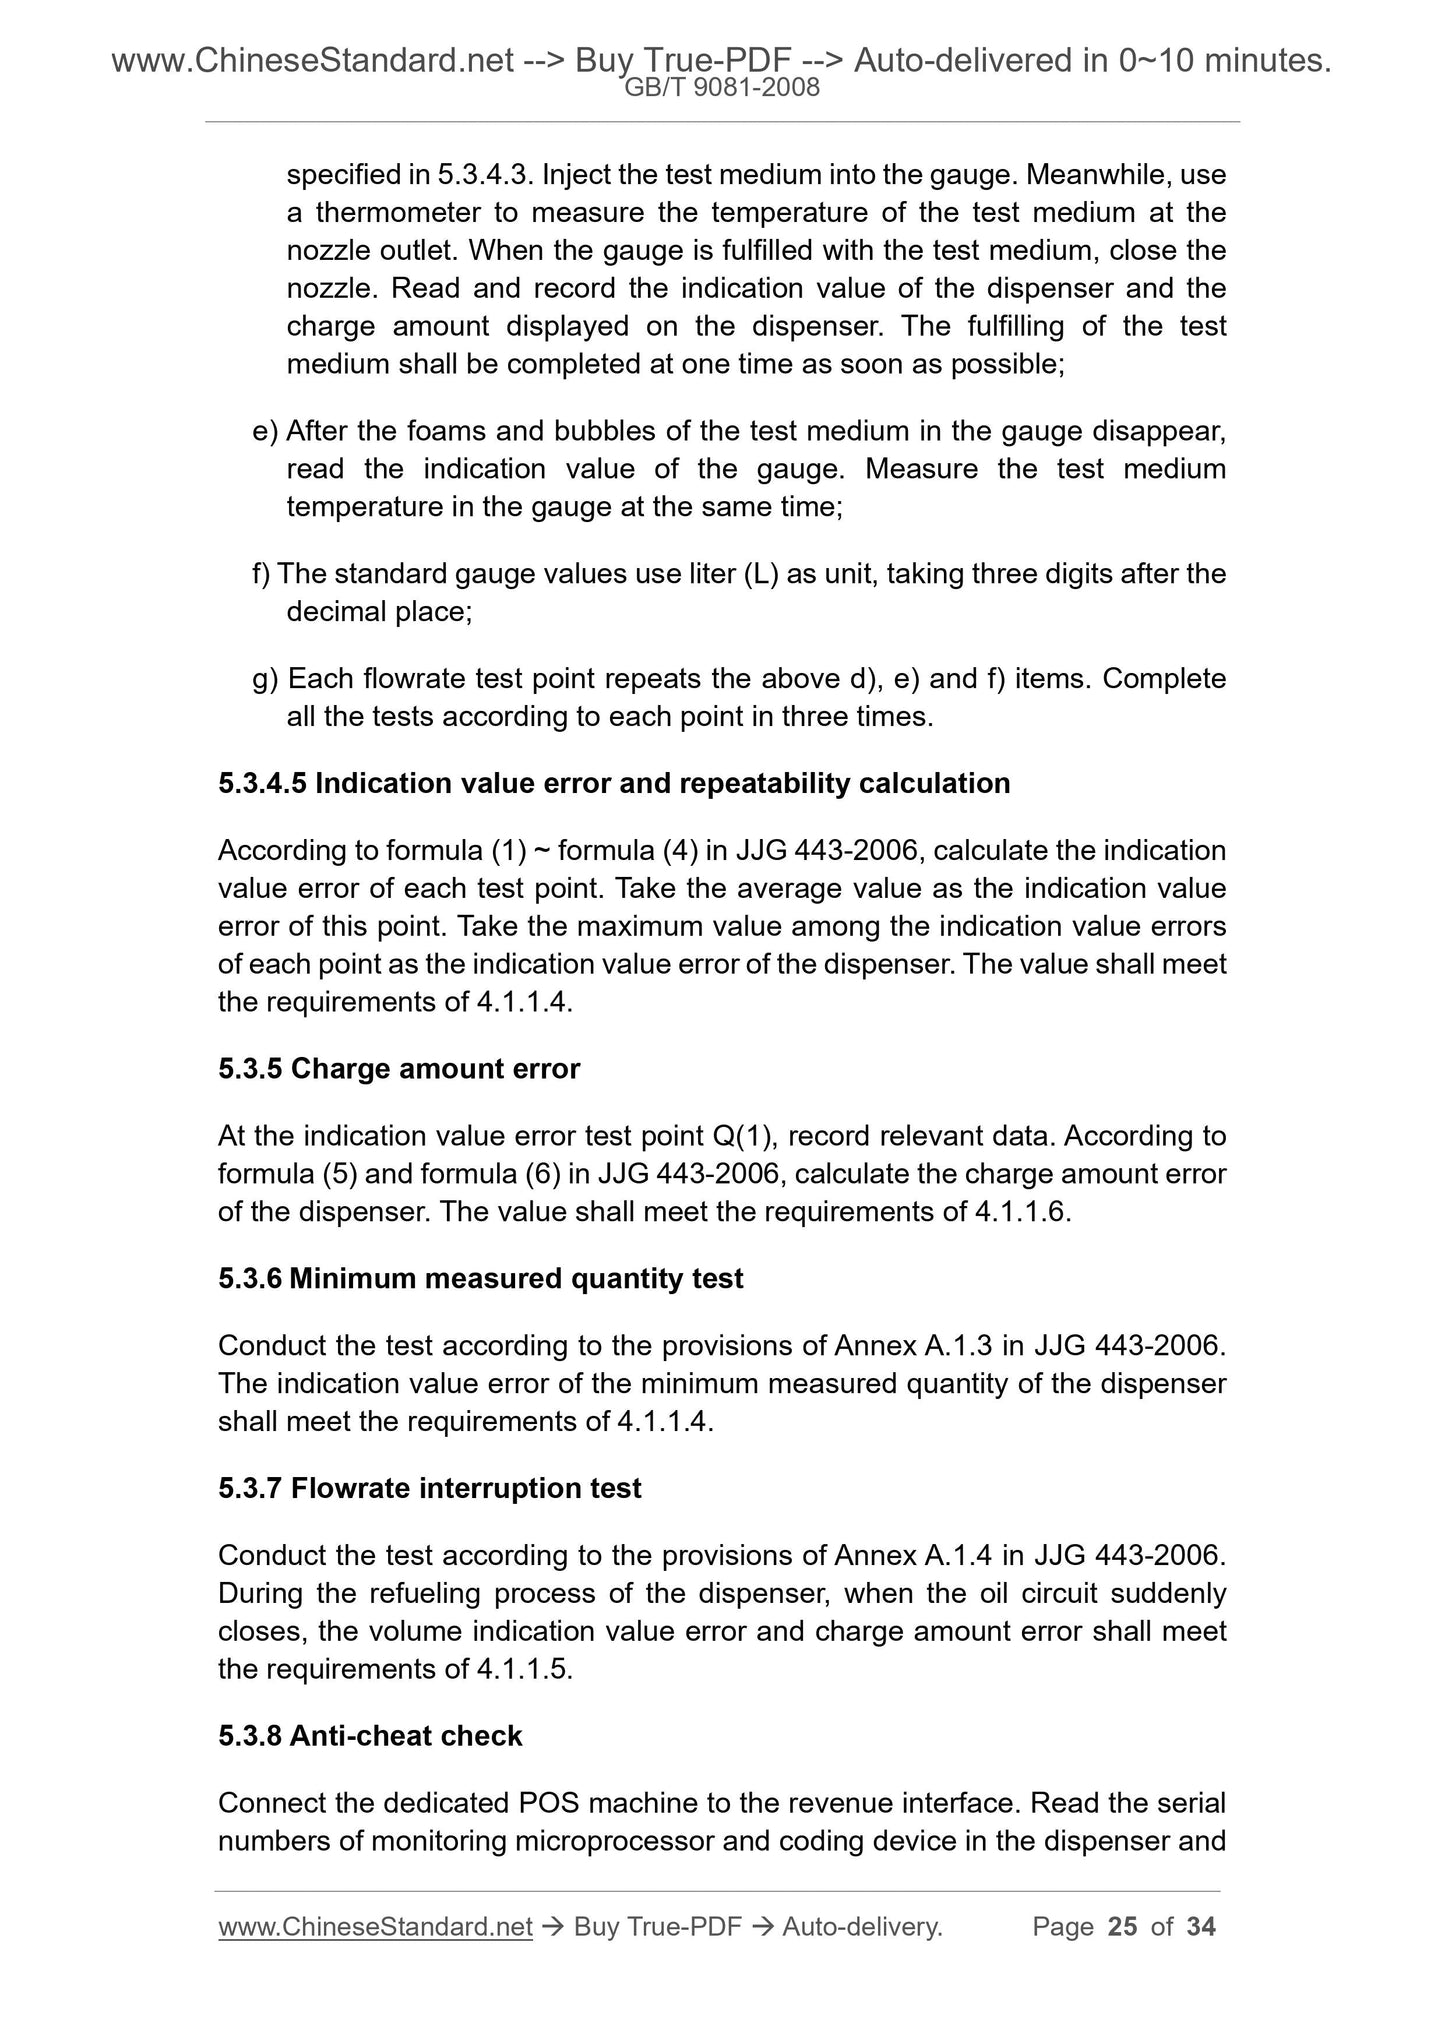 GB/T 9081-2008 Page 9